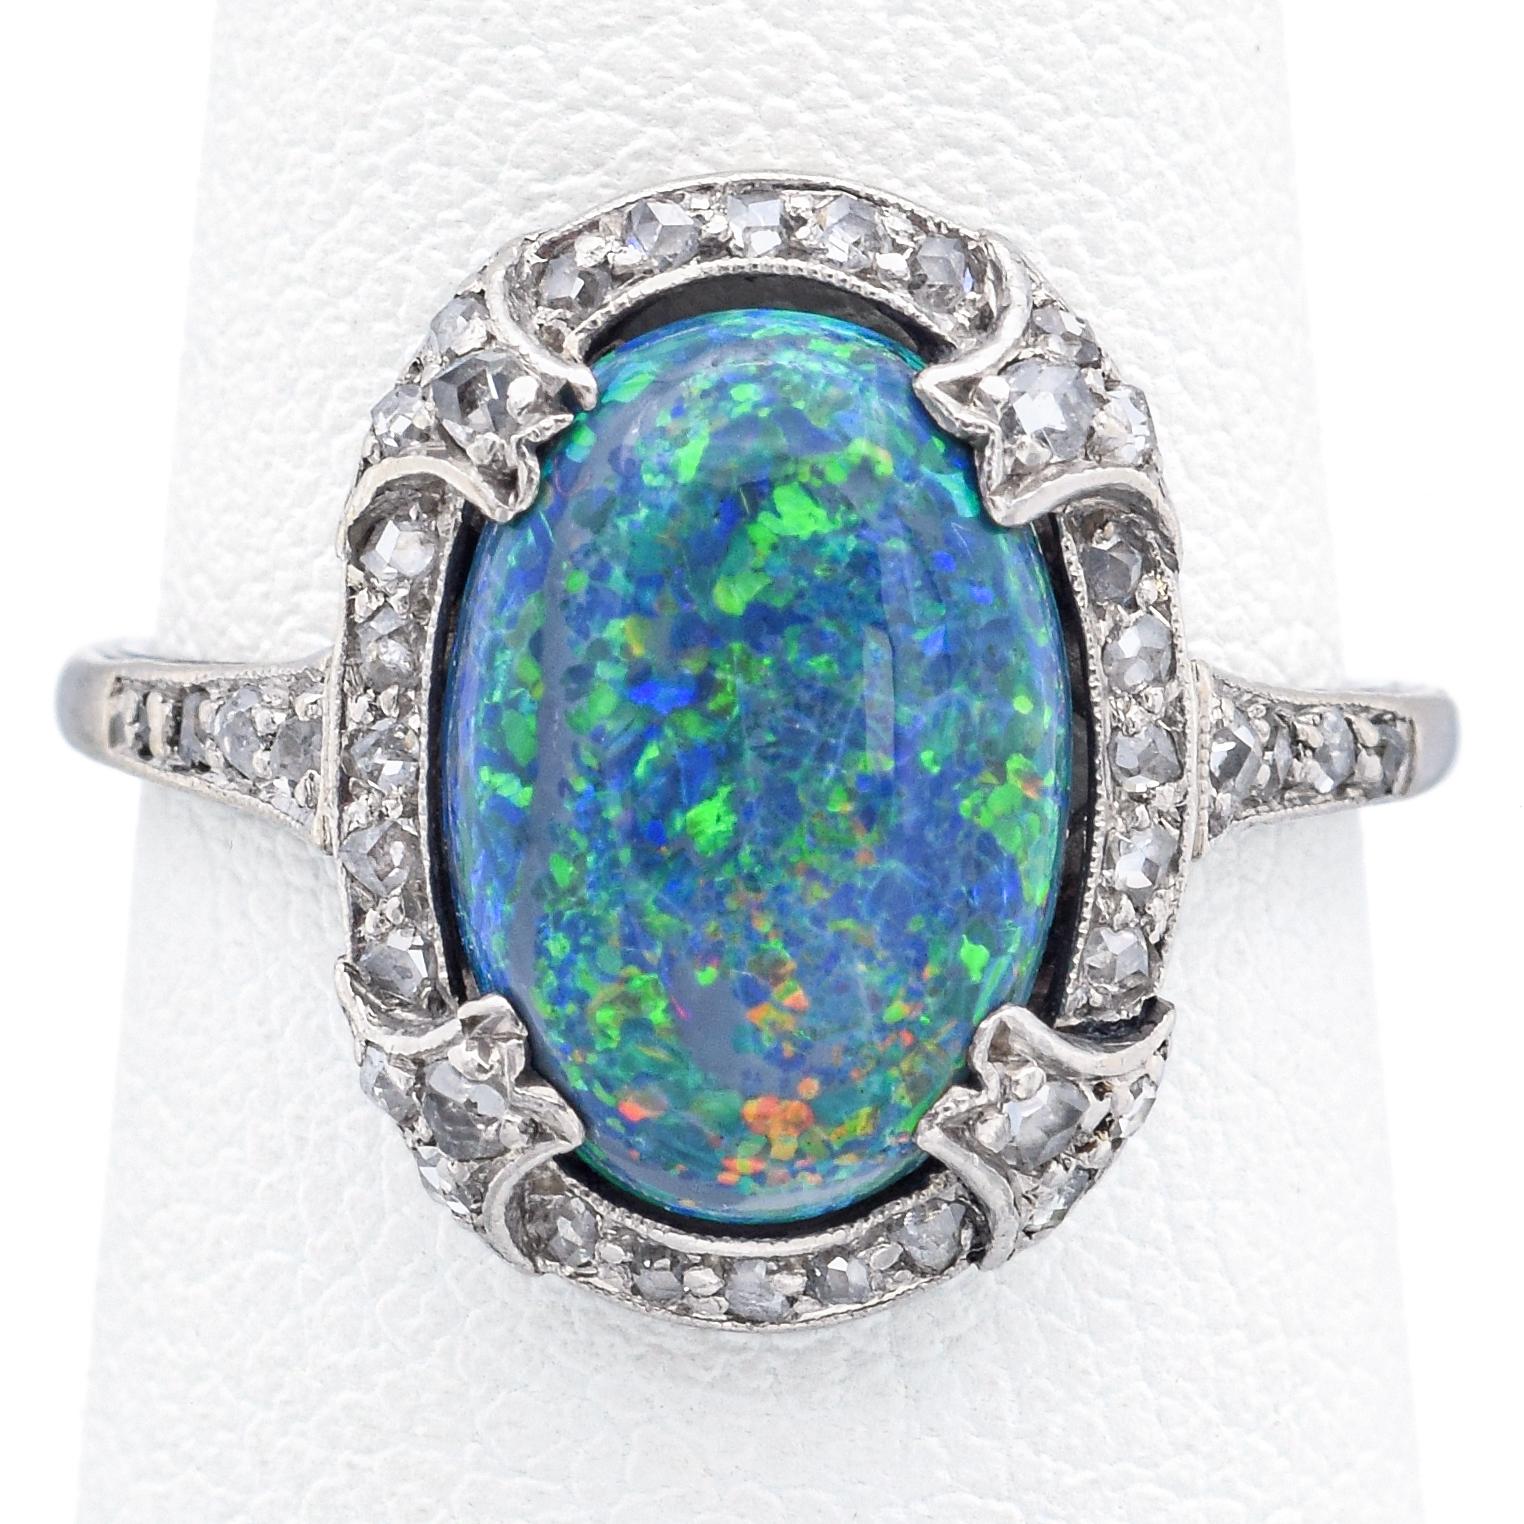 Weight: 3.2 Grams
Stone: 2.19 Ct (12x8x4 mm) Black Opal & Approx 0.23 TCW (0.005-0.01 ct) Rose Cut Diamonds
Face of Ring: 16 x 15 x 5 mm
Ring Size: 5.5
Hallmark:  Platinum Tested

Item #: BR-1077-101823-17